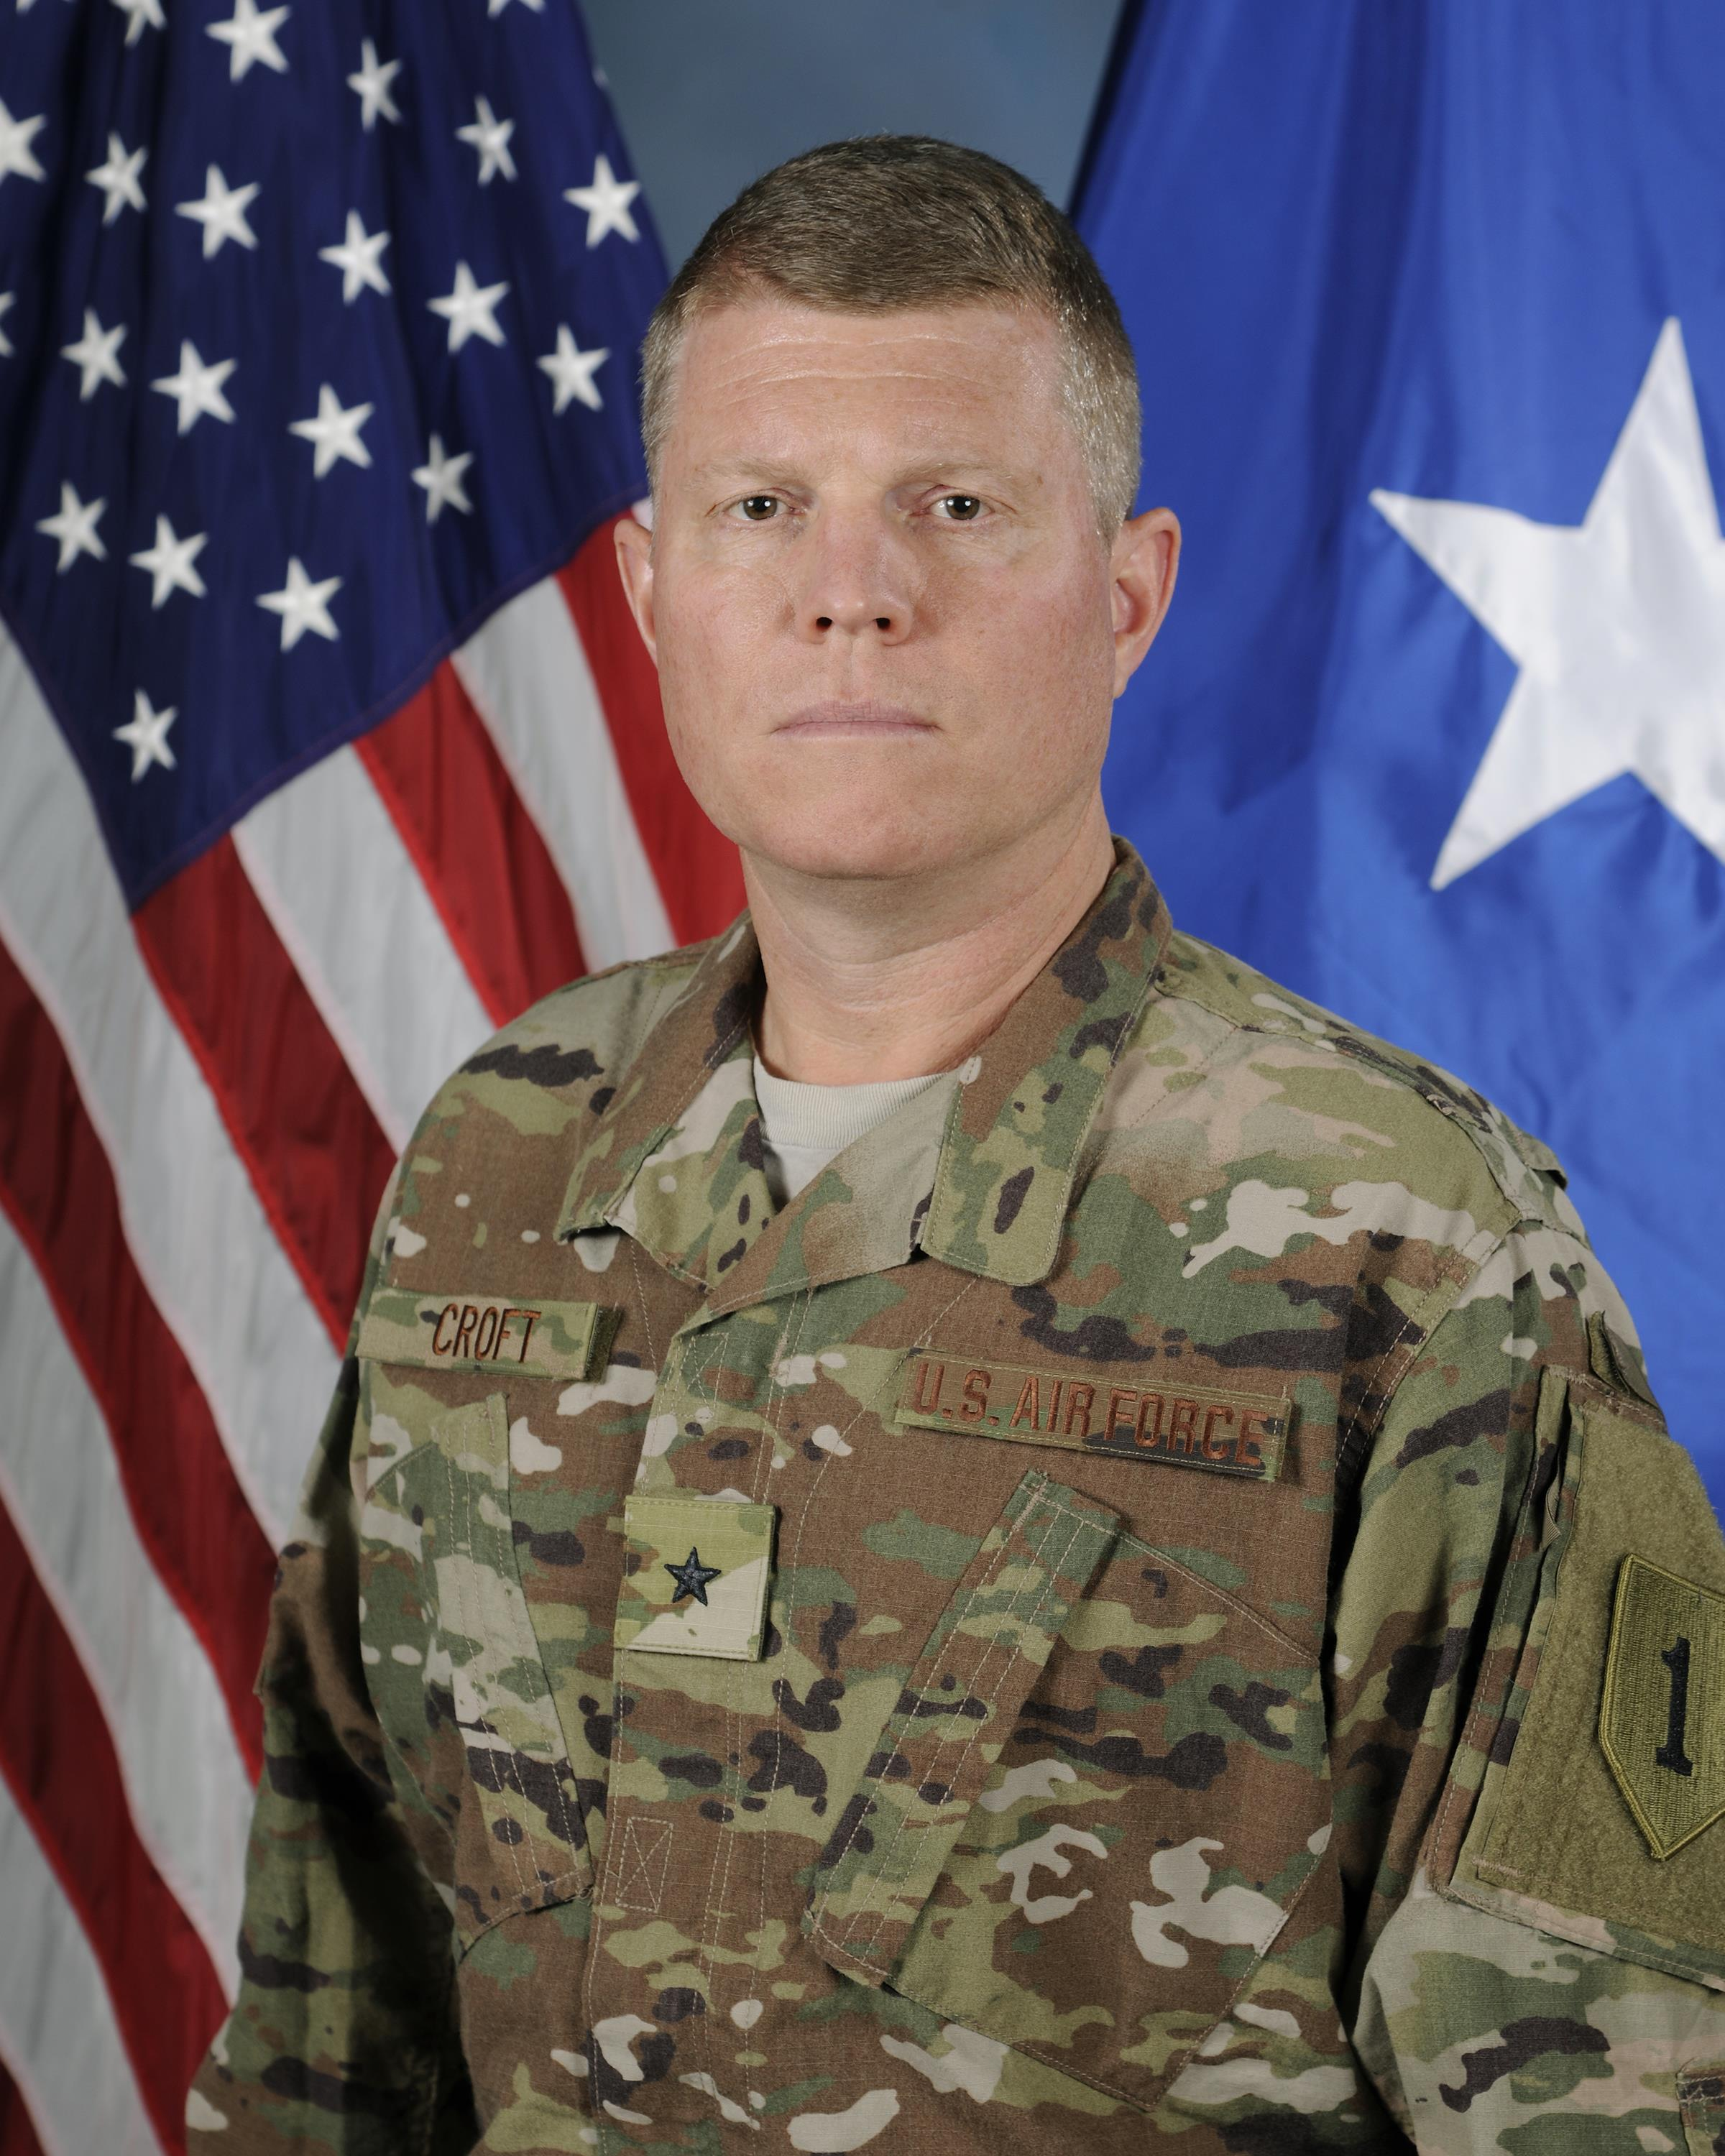 Brig. Gen. Andrew A. Croft is the deputy commanding general of the US-led coalition against ISIS in Iraq. (Courtesy US Air Force)